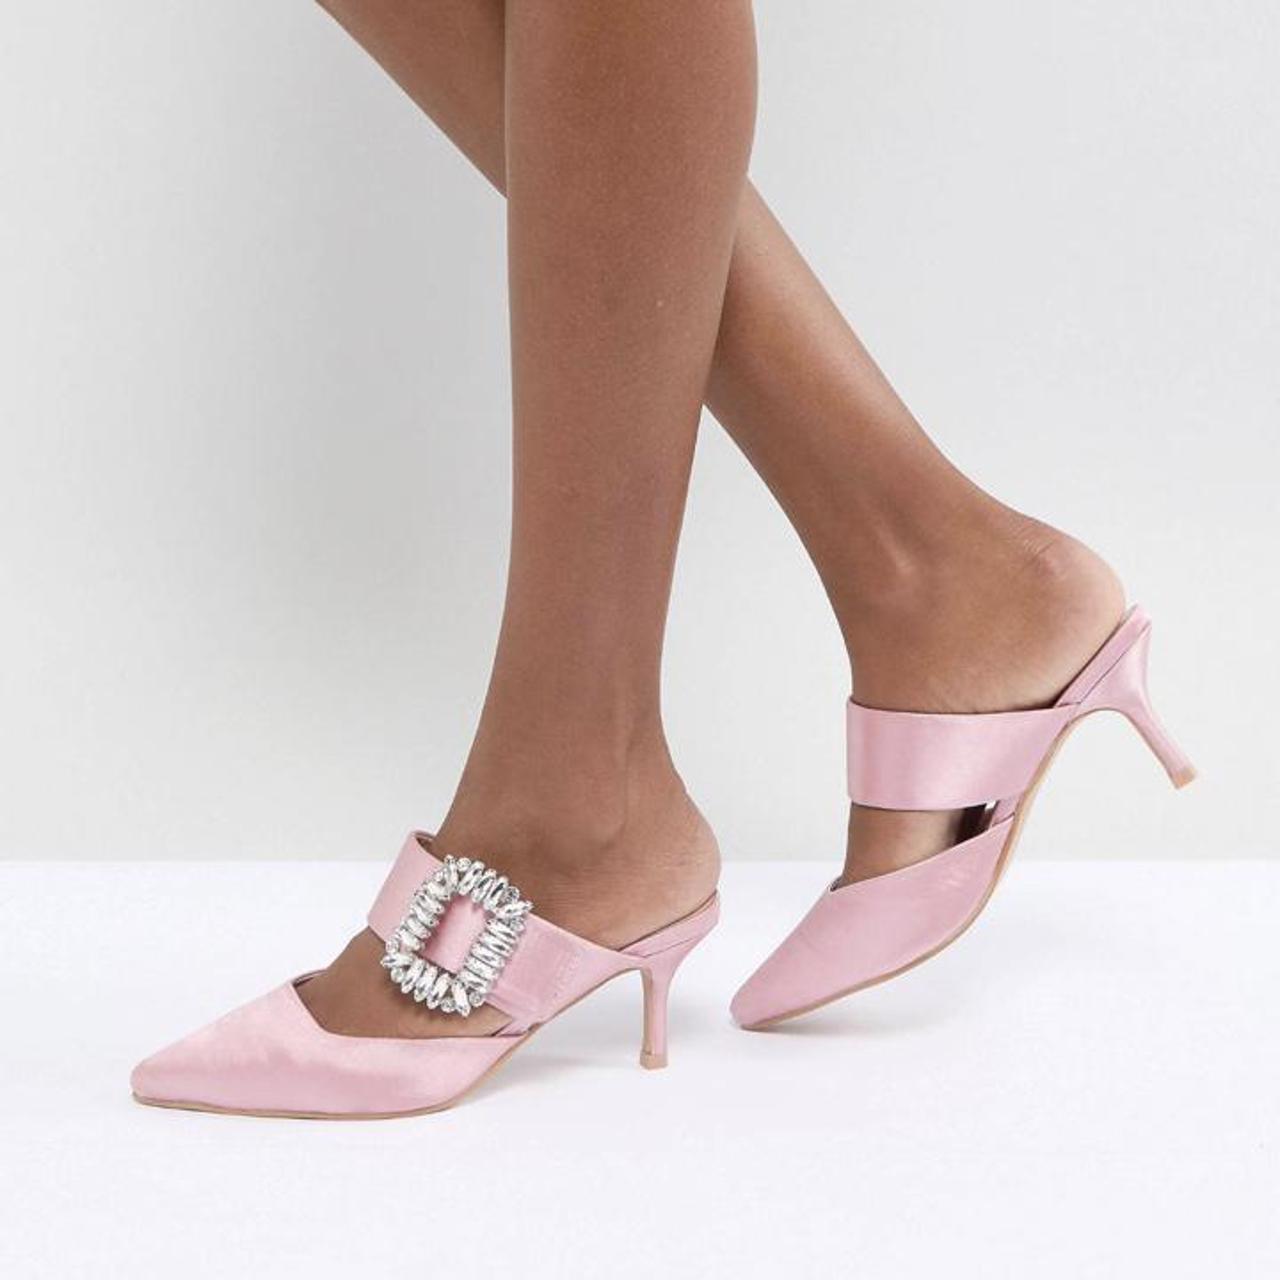 Product Image 4 - true decadence satin pink mules/kitten